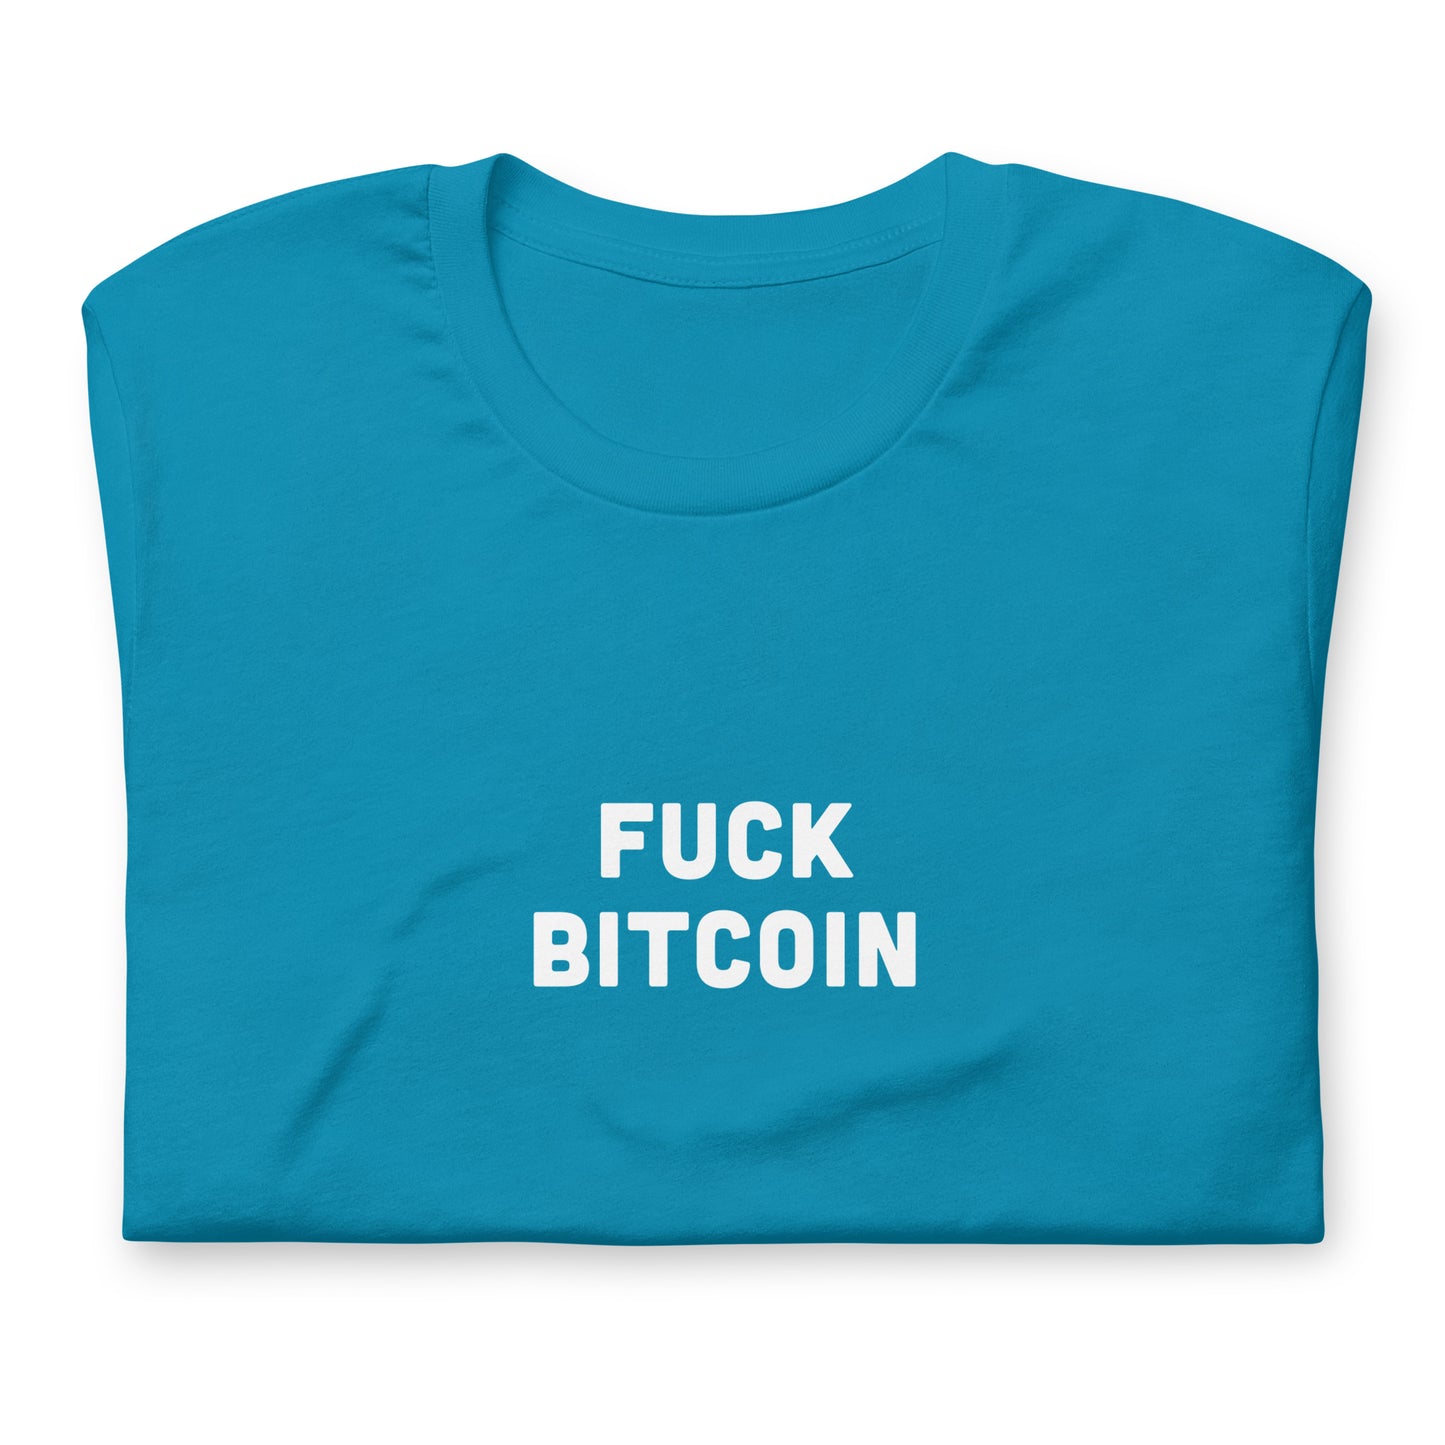 Fuck Bitcoin T-Shirt Size M Color Navy